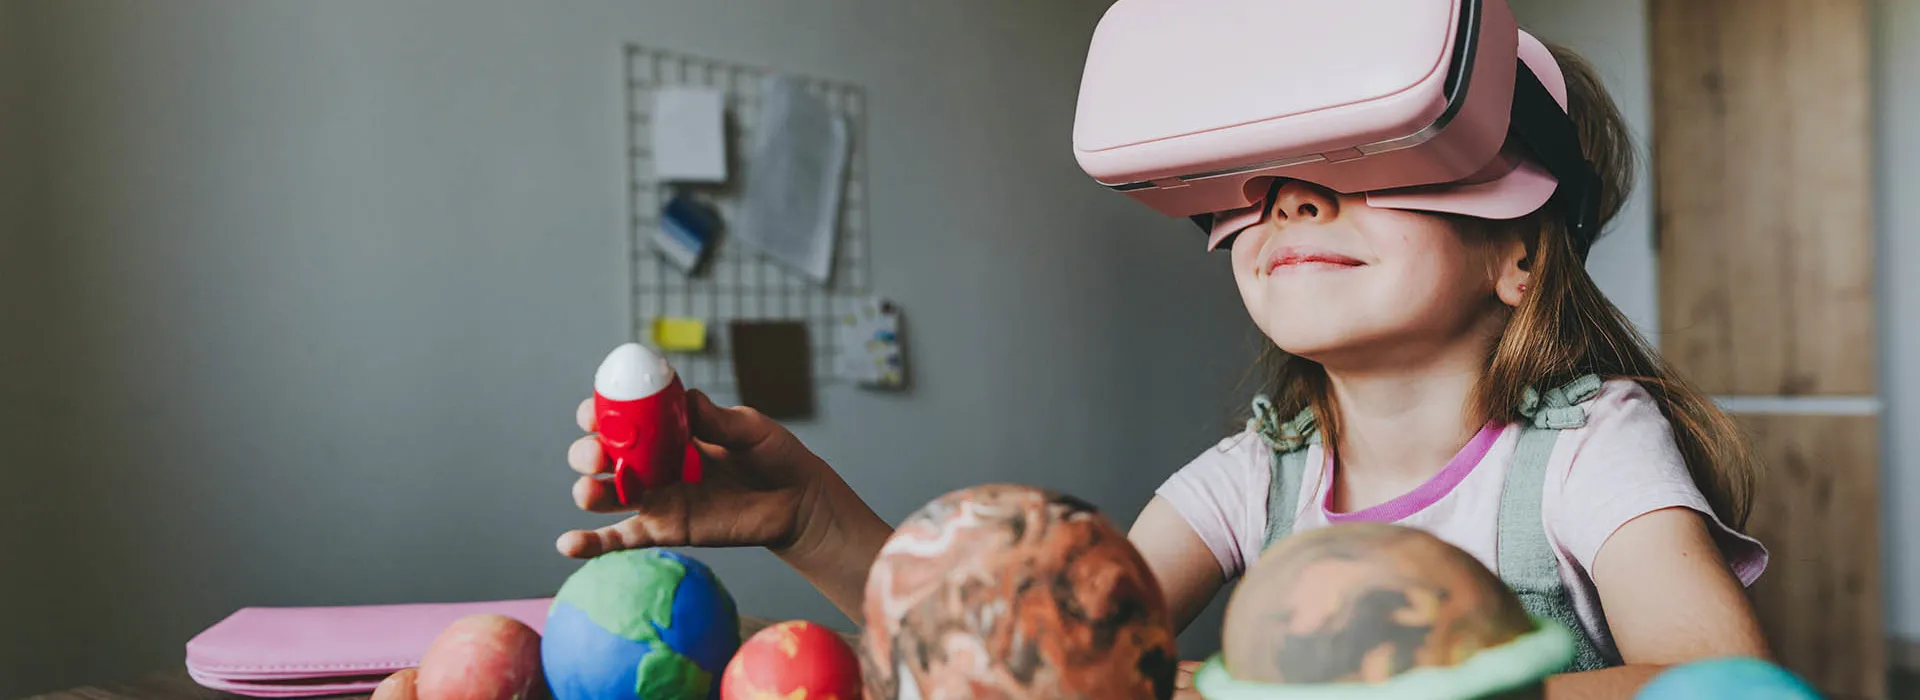 girl with VR headset and spaceship toy 